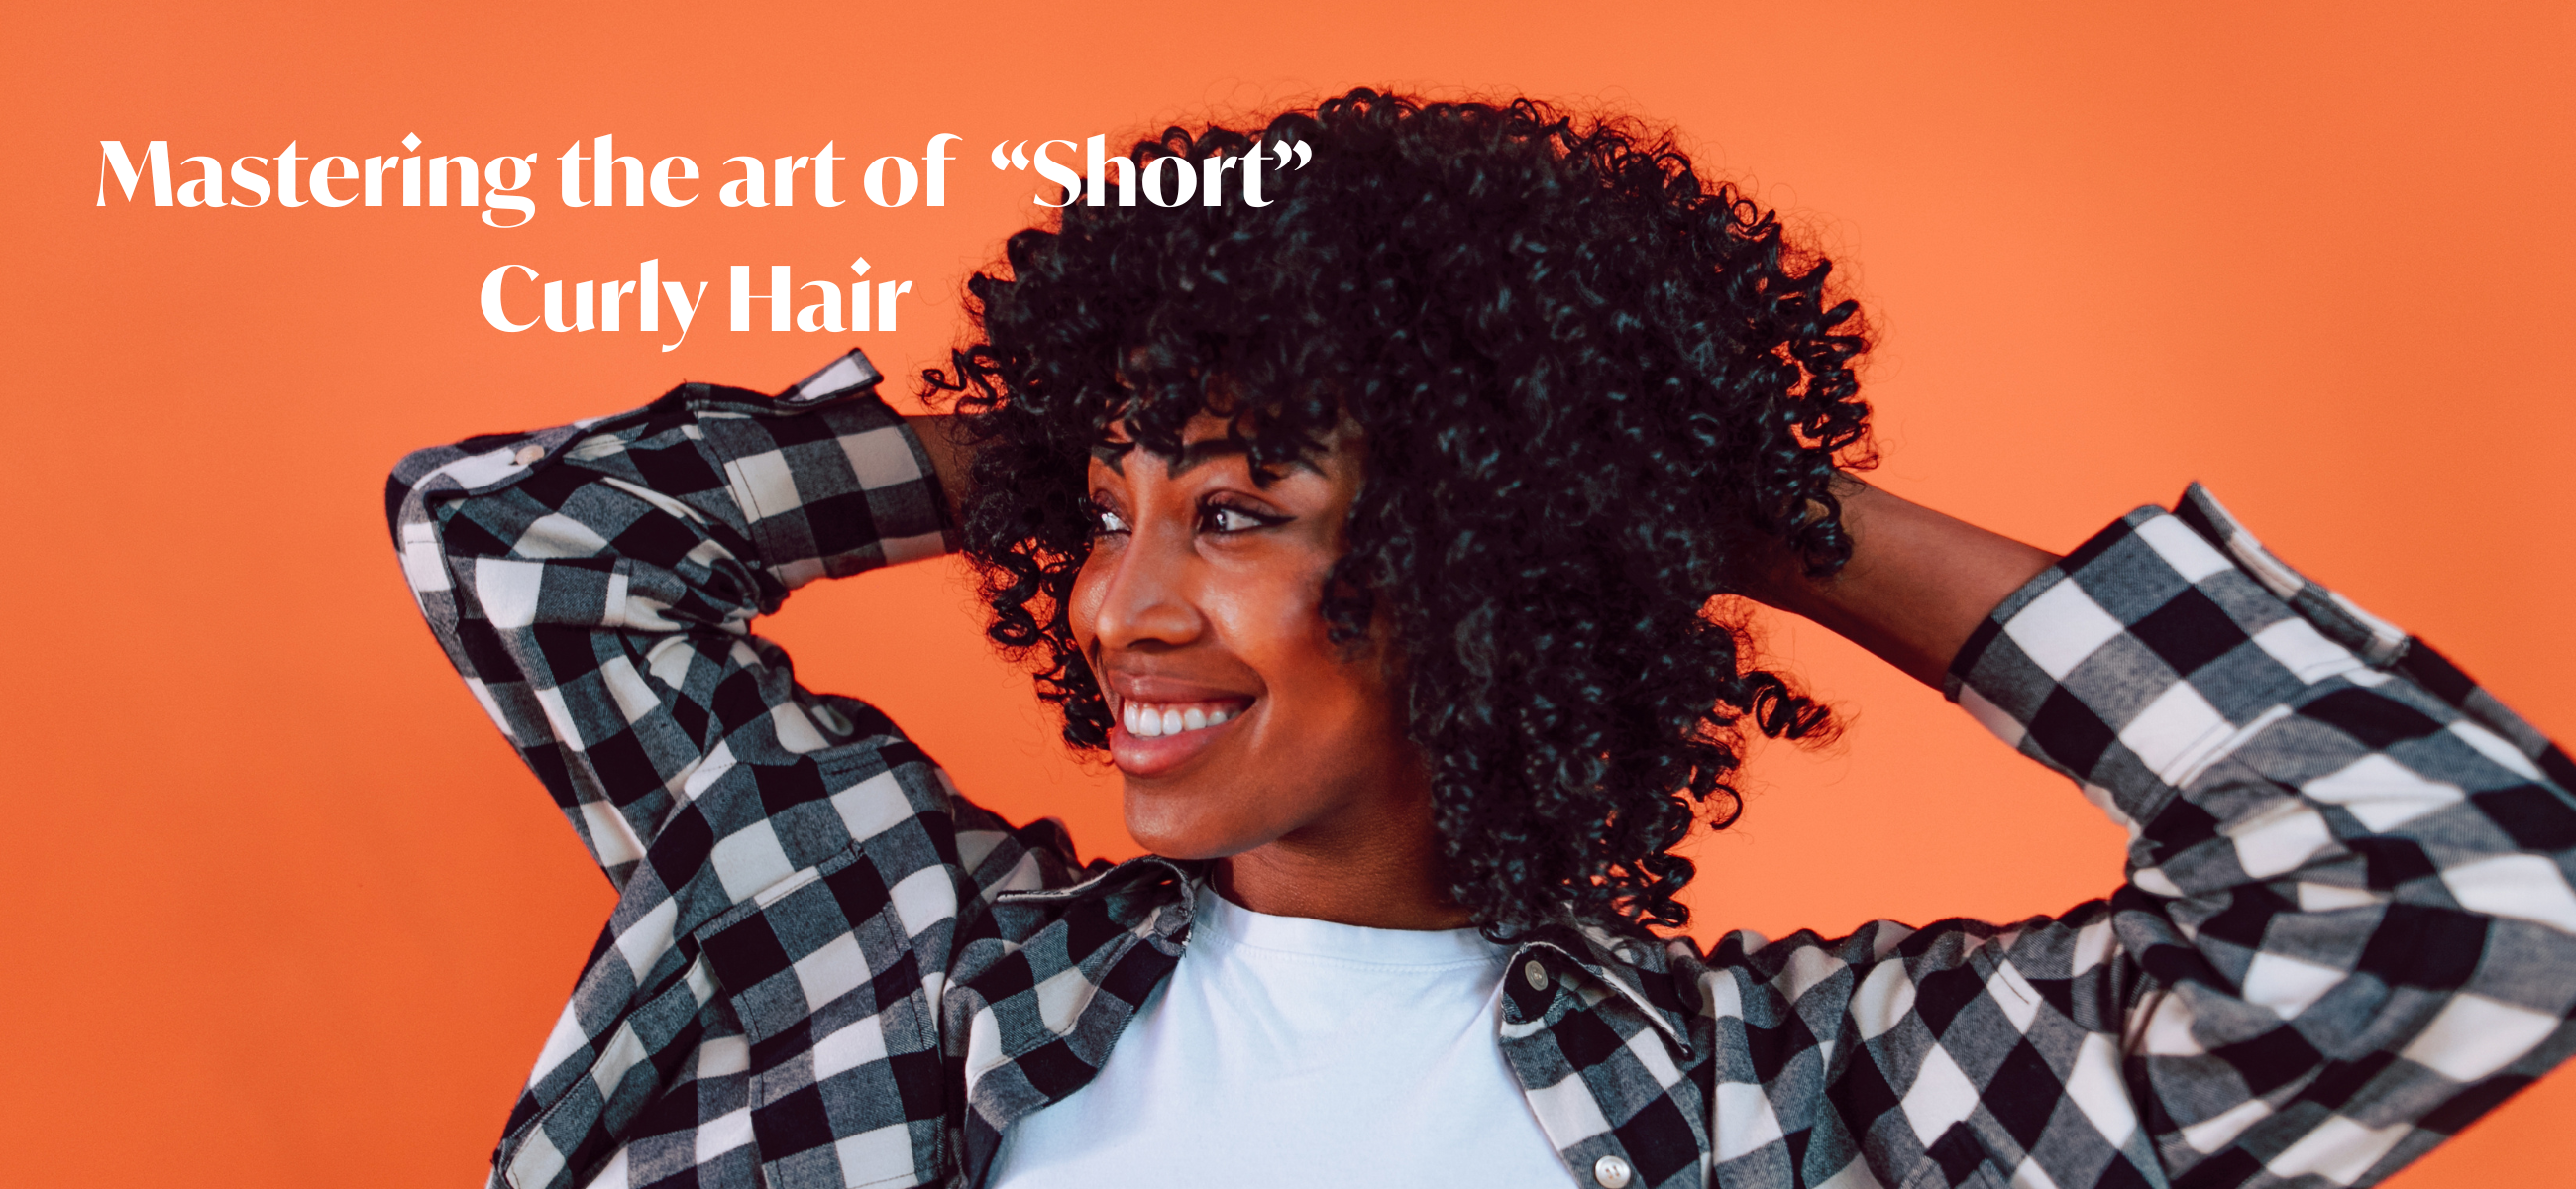 Mastering the Art of “Short” Curly Hair: Step-by-Step Styling Techniques for Shorter Hairstyles